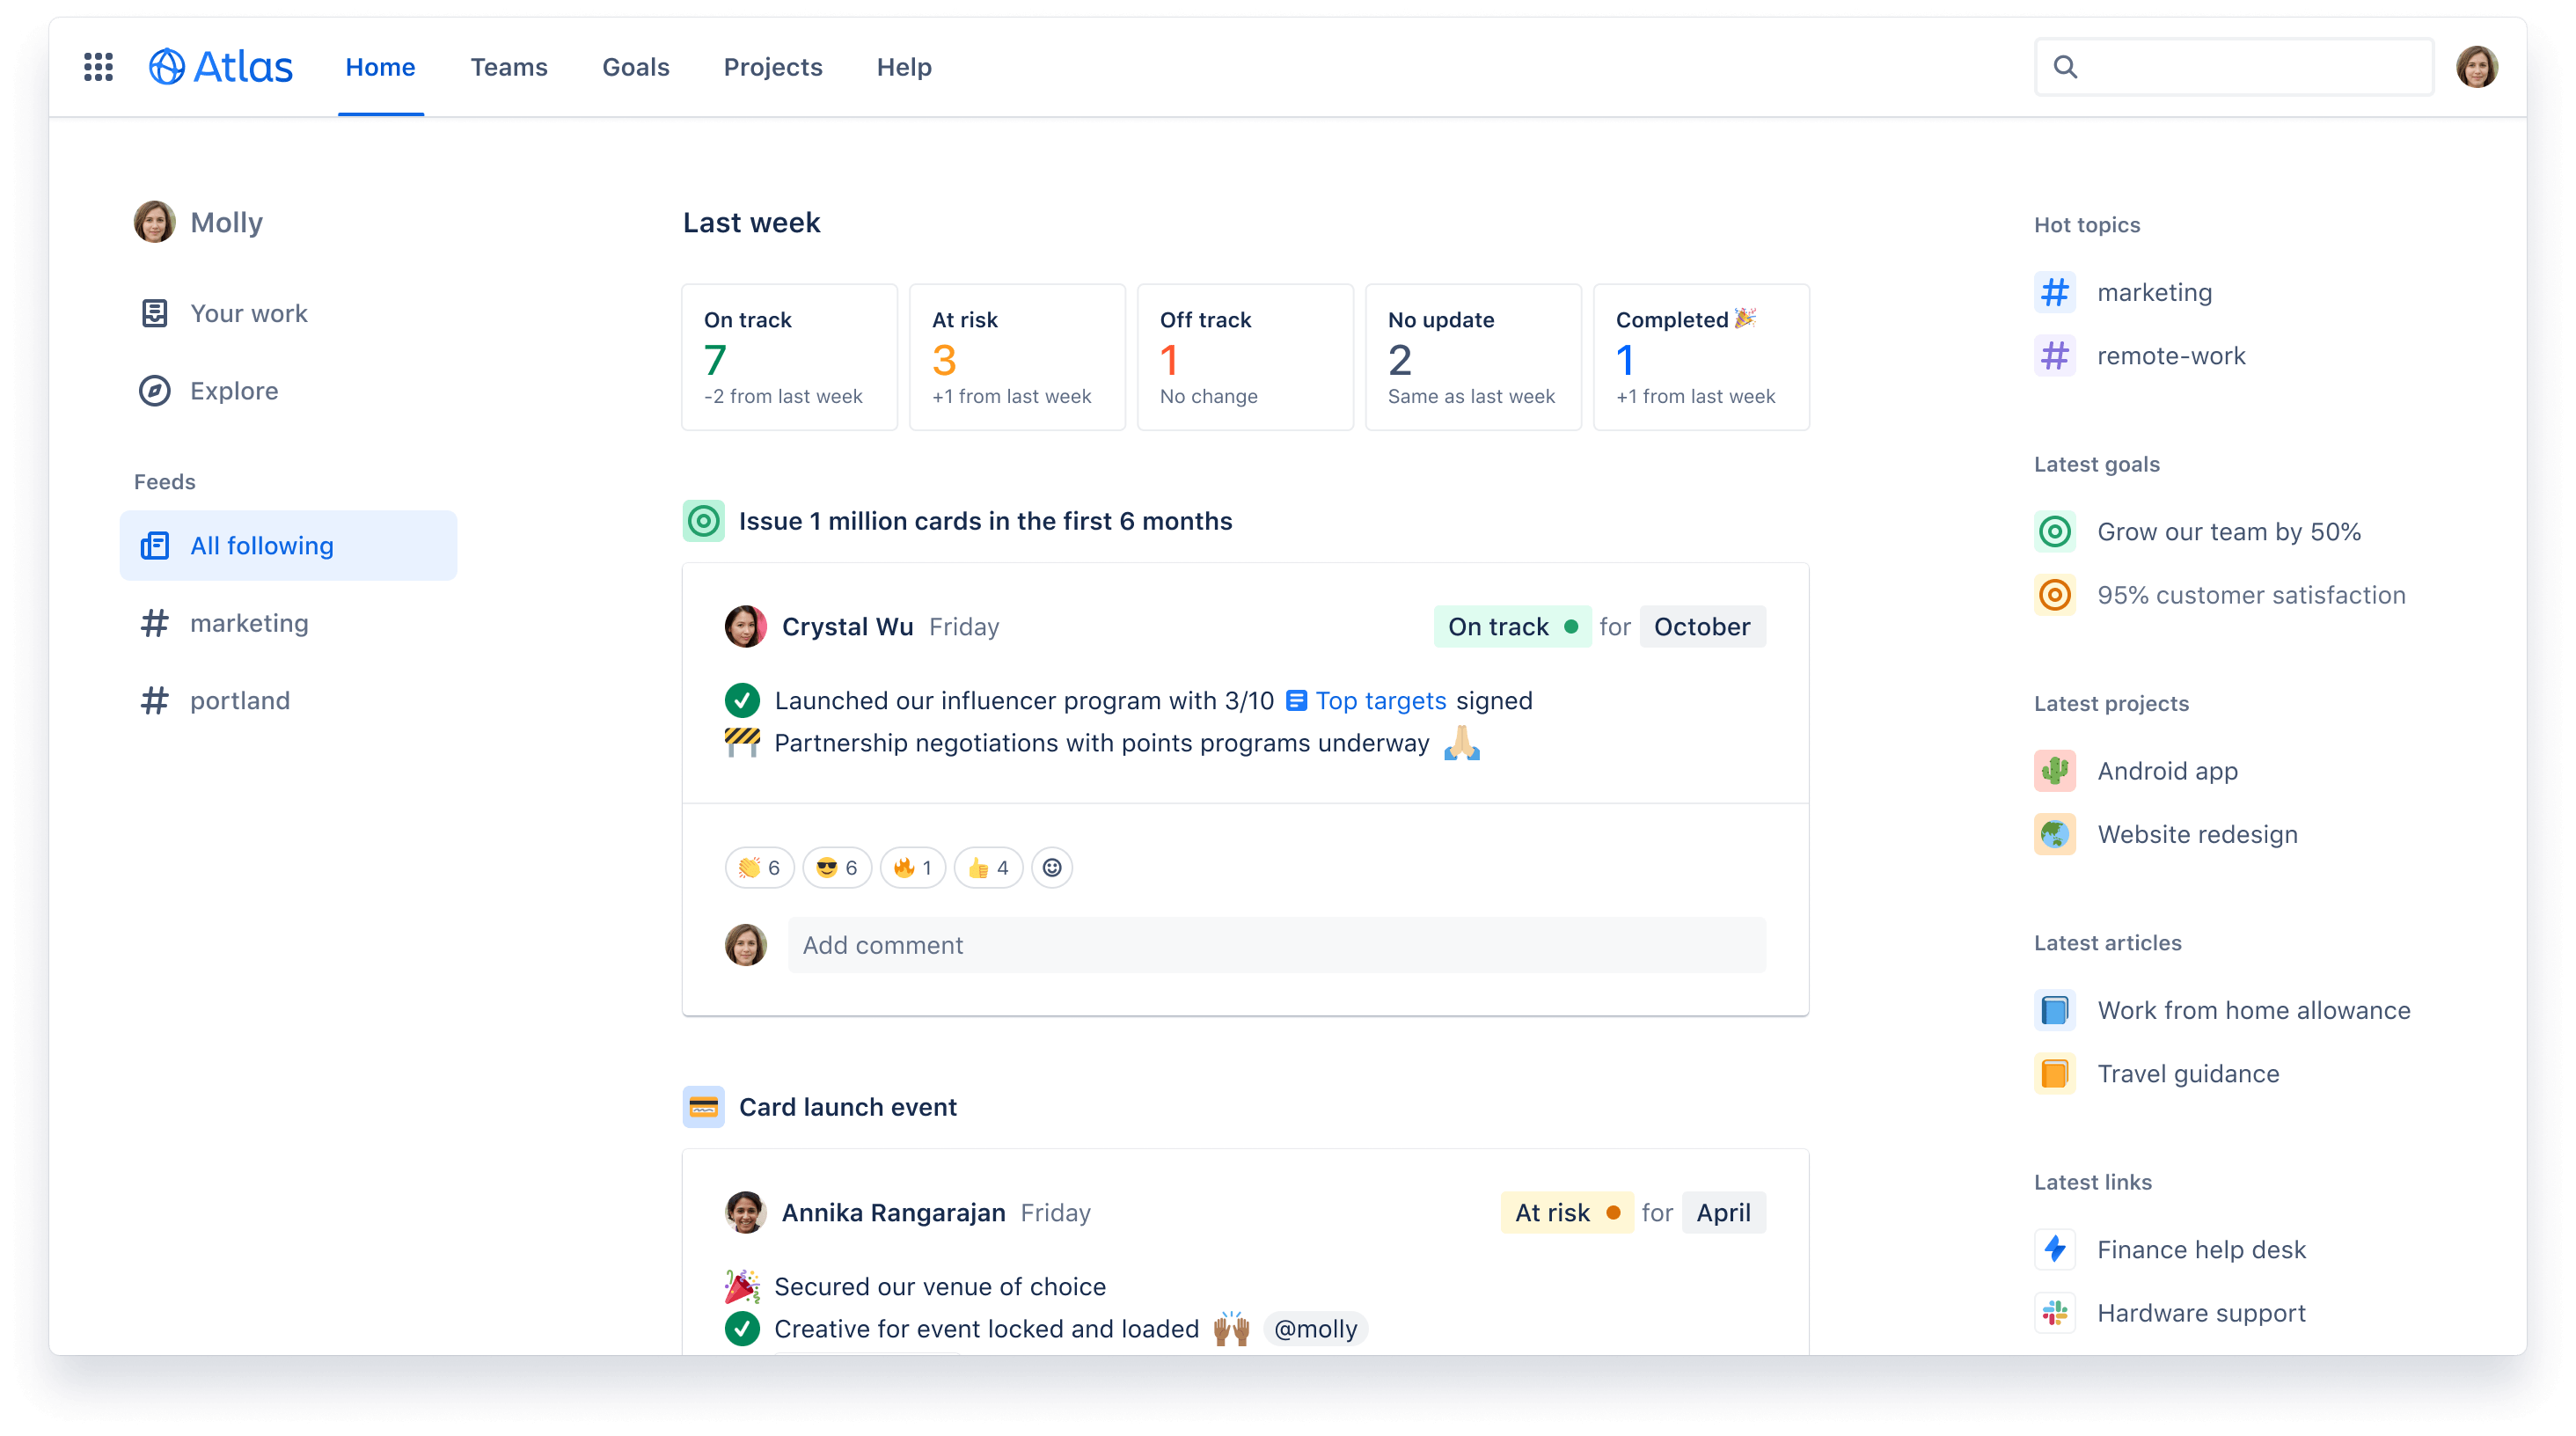 Atlassian news: Atlas helps to track OKRs and different project goals for all teams within a company